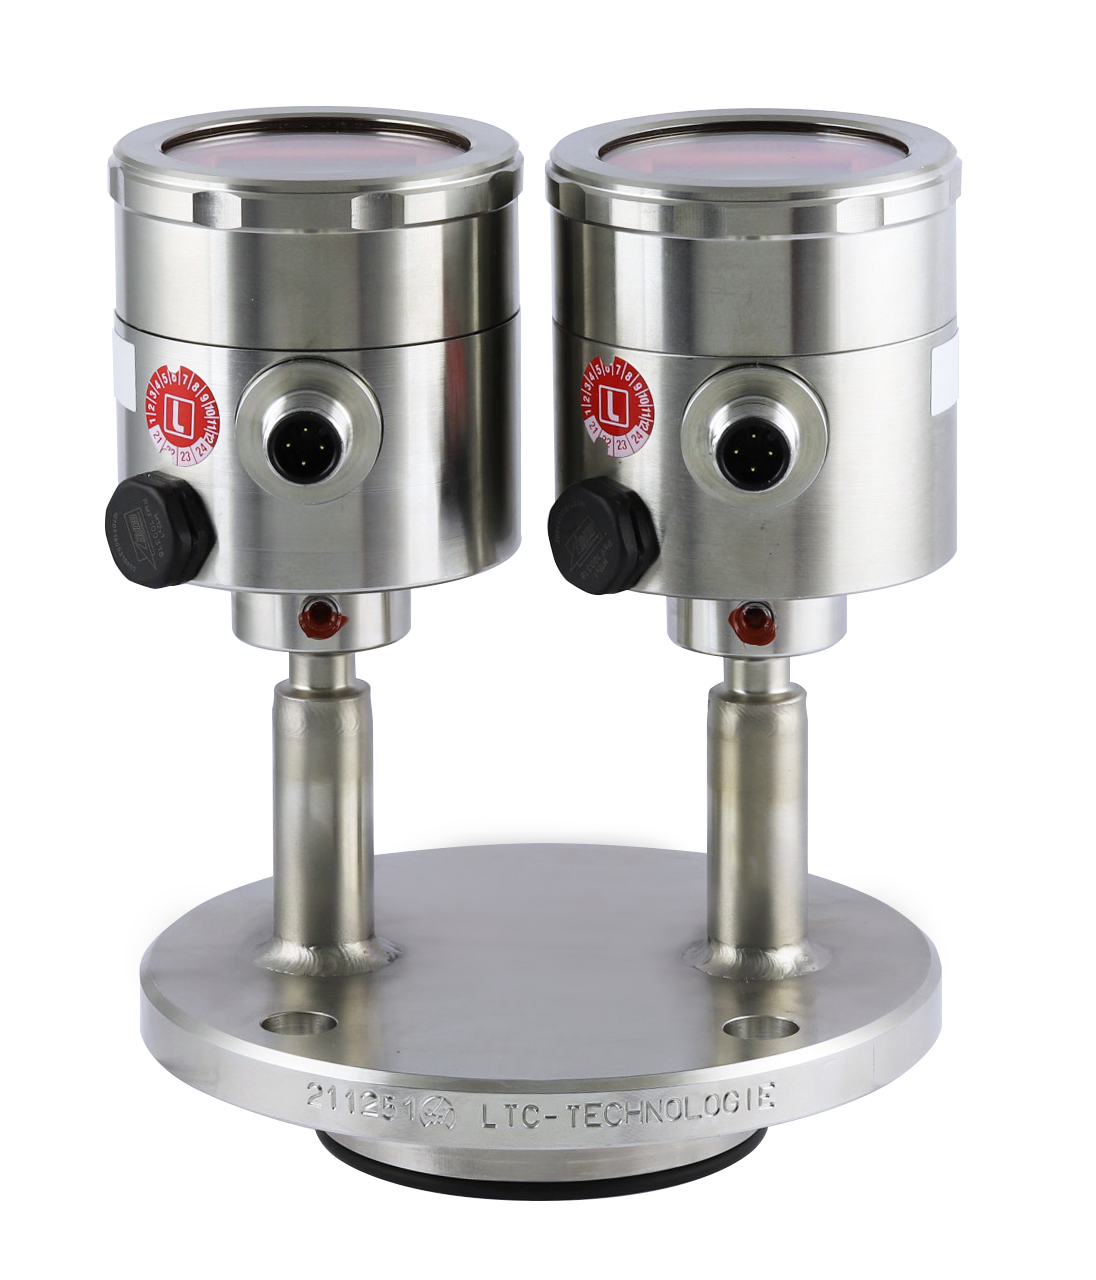 Customized Measurement solution: Two Pressure Transmitters At The Same Measuring Point